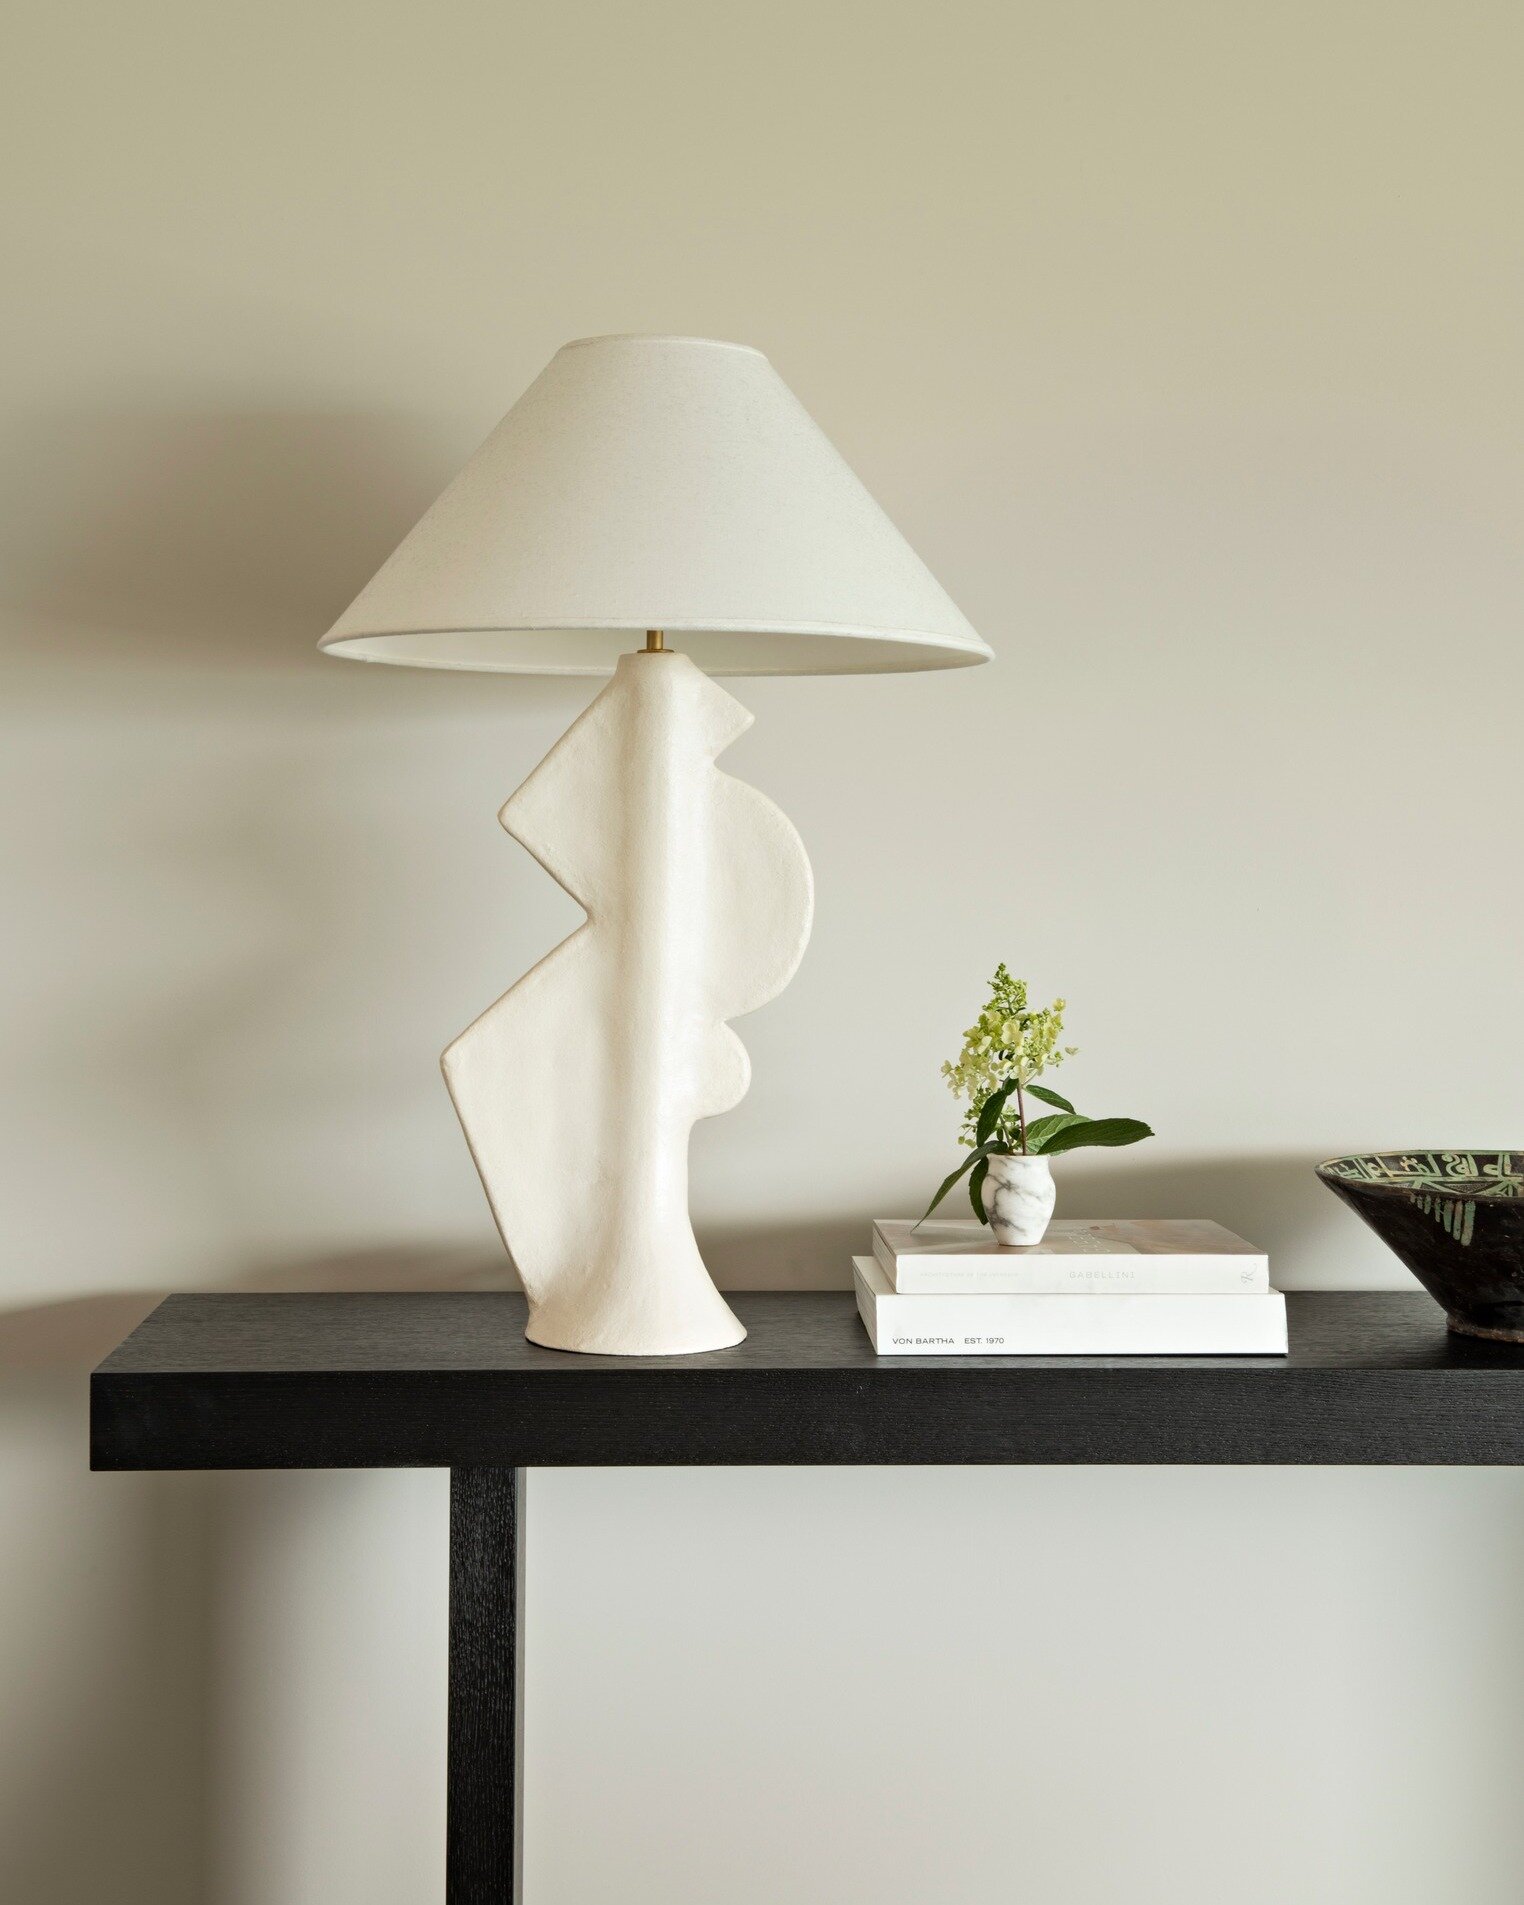 LIGHT SCULPTURES. All the way from Australia, this ceramic table lamp has come to make a statement. Ceramic artist @sarahnedovicgaunt creates sculptural pieces unlike any other. Caught on camera at Garden House H and exclusively available at Spring H